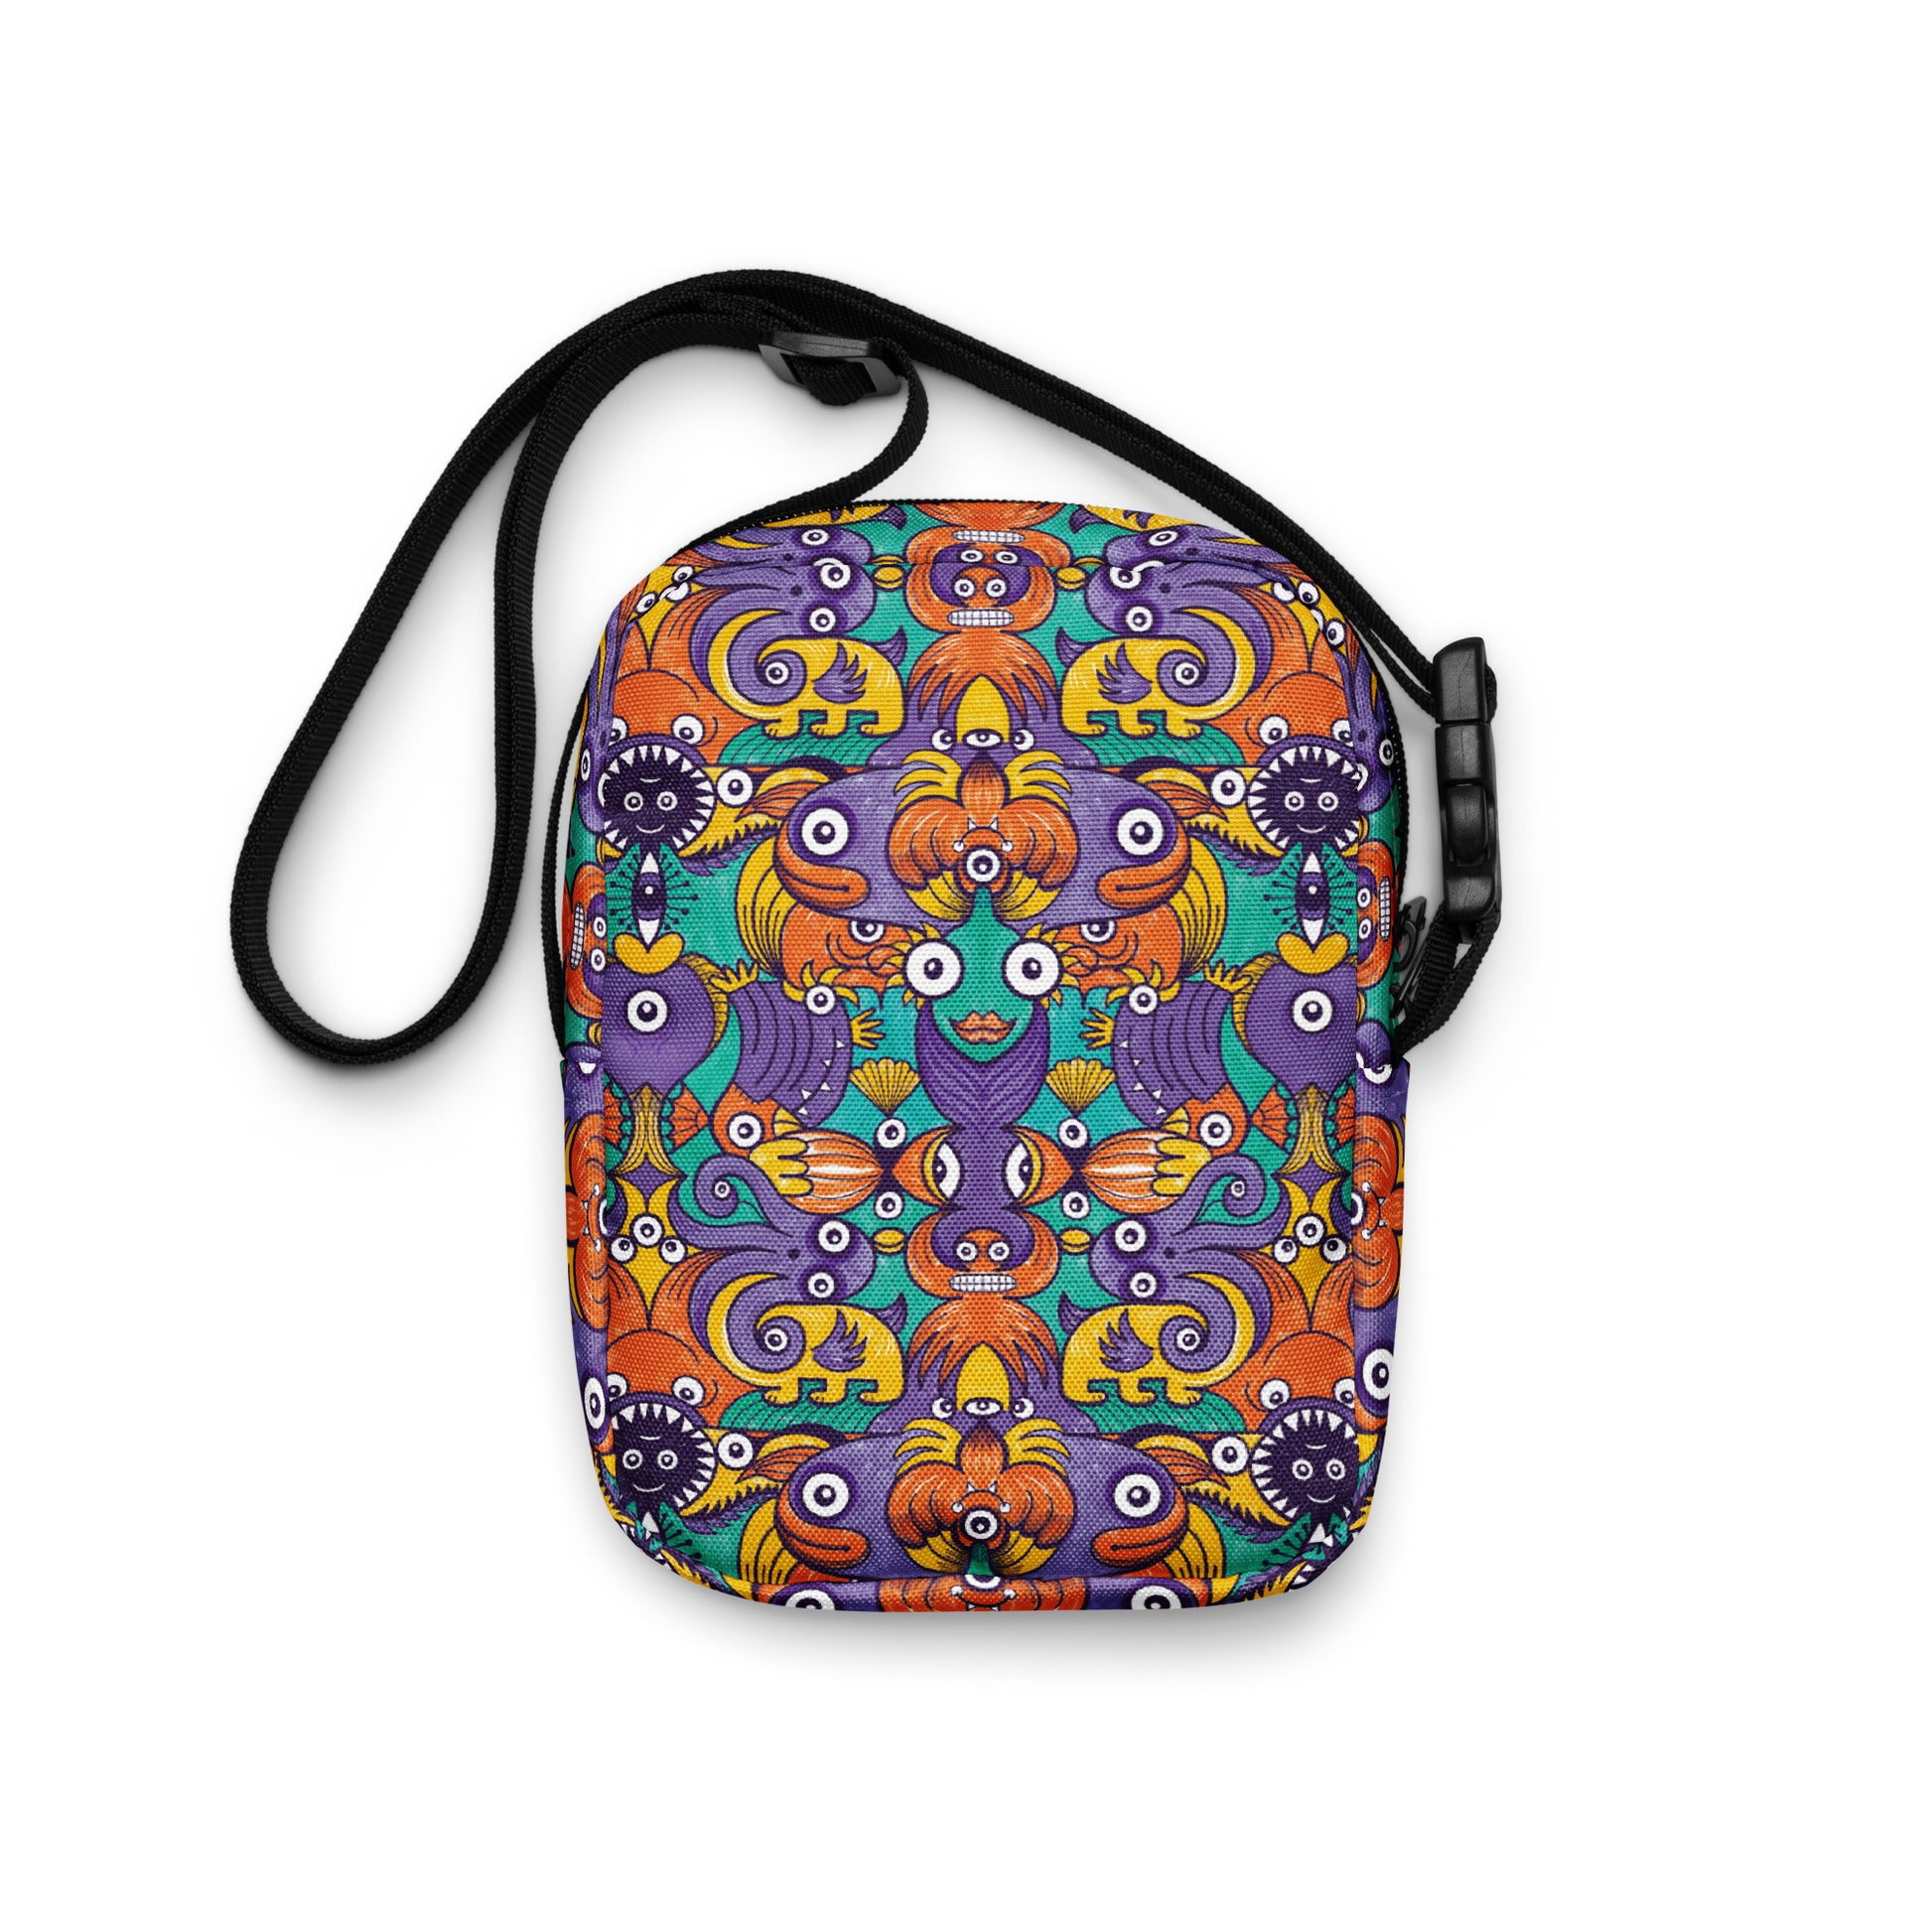 Dive into Whimsical Waters: An Undersea Odyssey - Utility crossbody bag. Back view